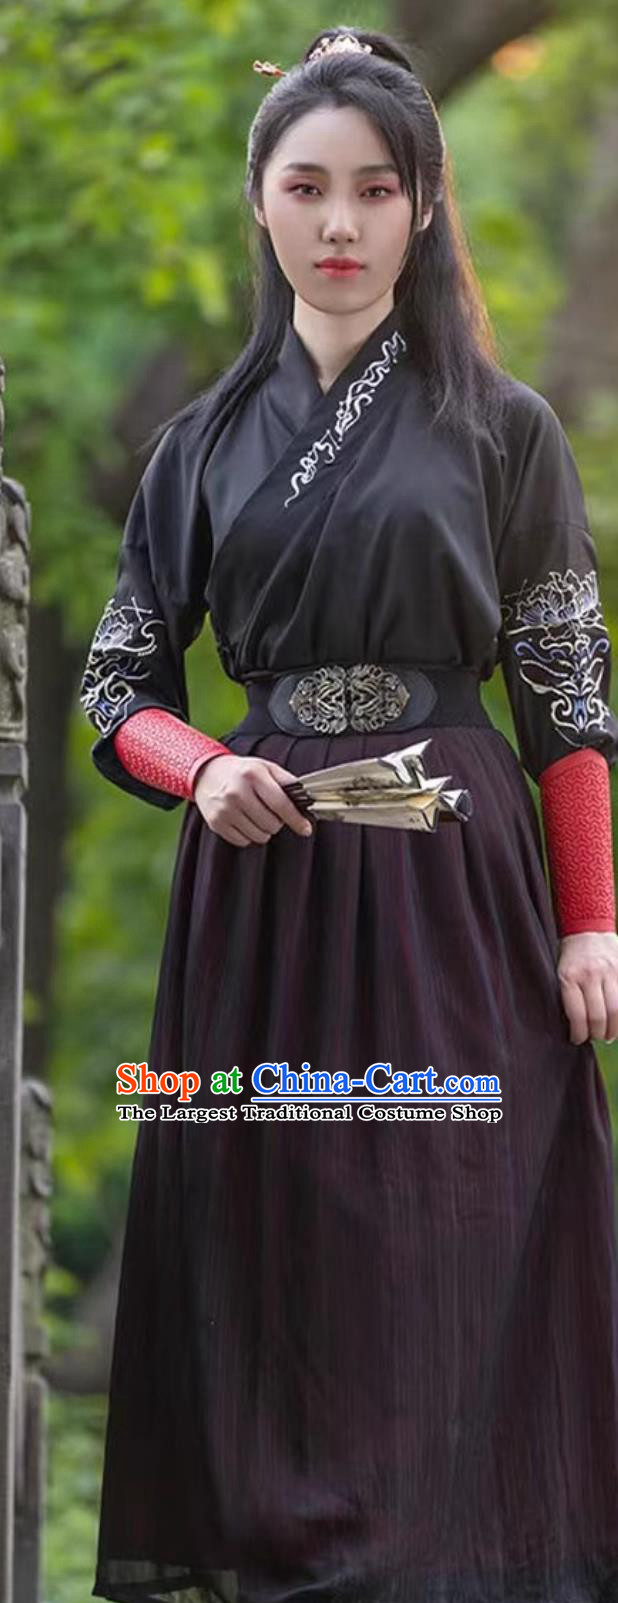 Chinese Ancient Swordswoman Clothing Traditional Wuxia Costumes China Ancient Superheroine Embroidered Outfit